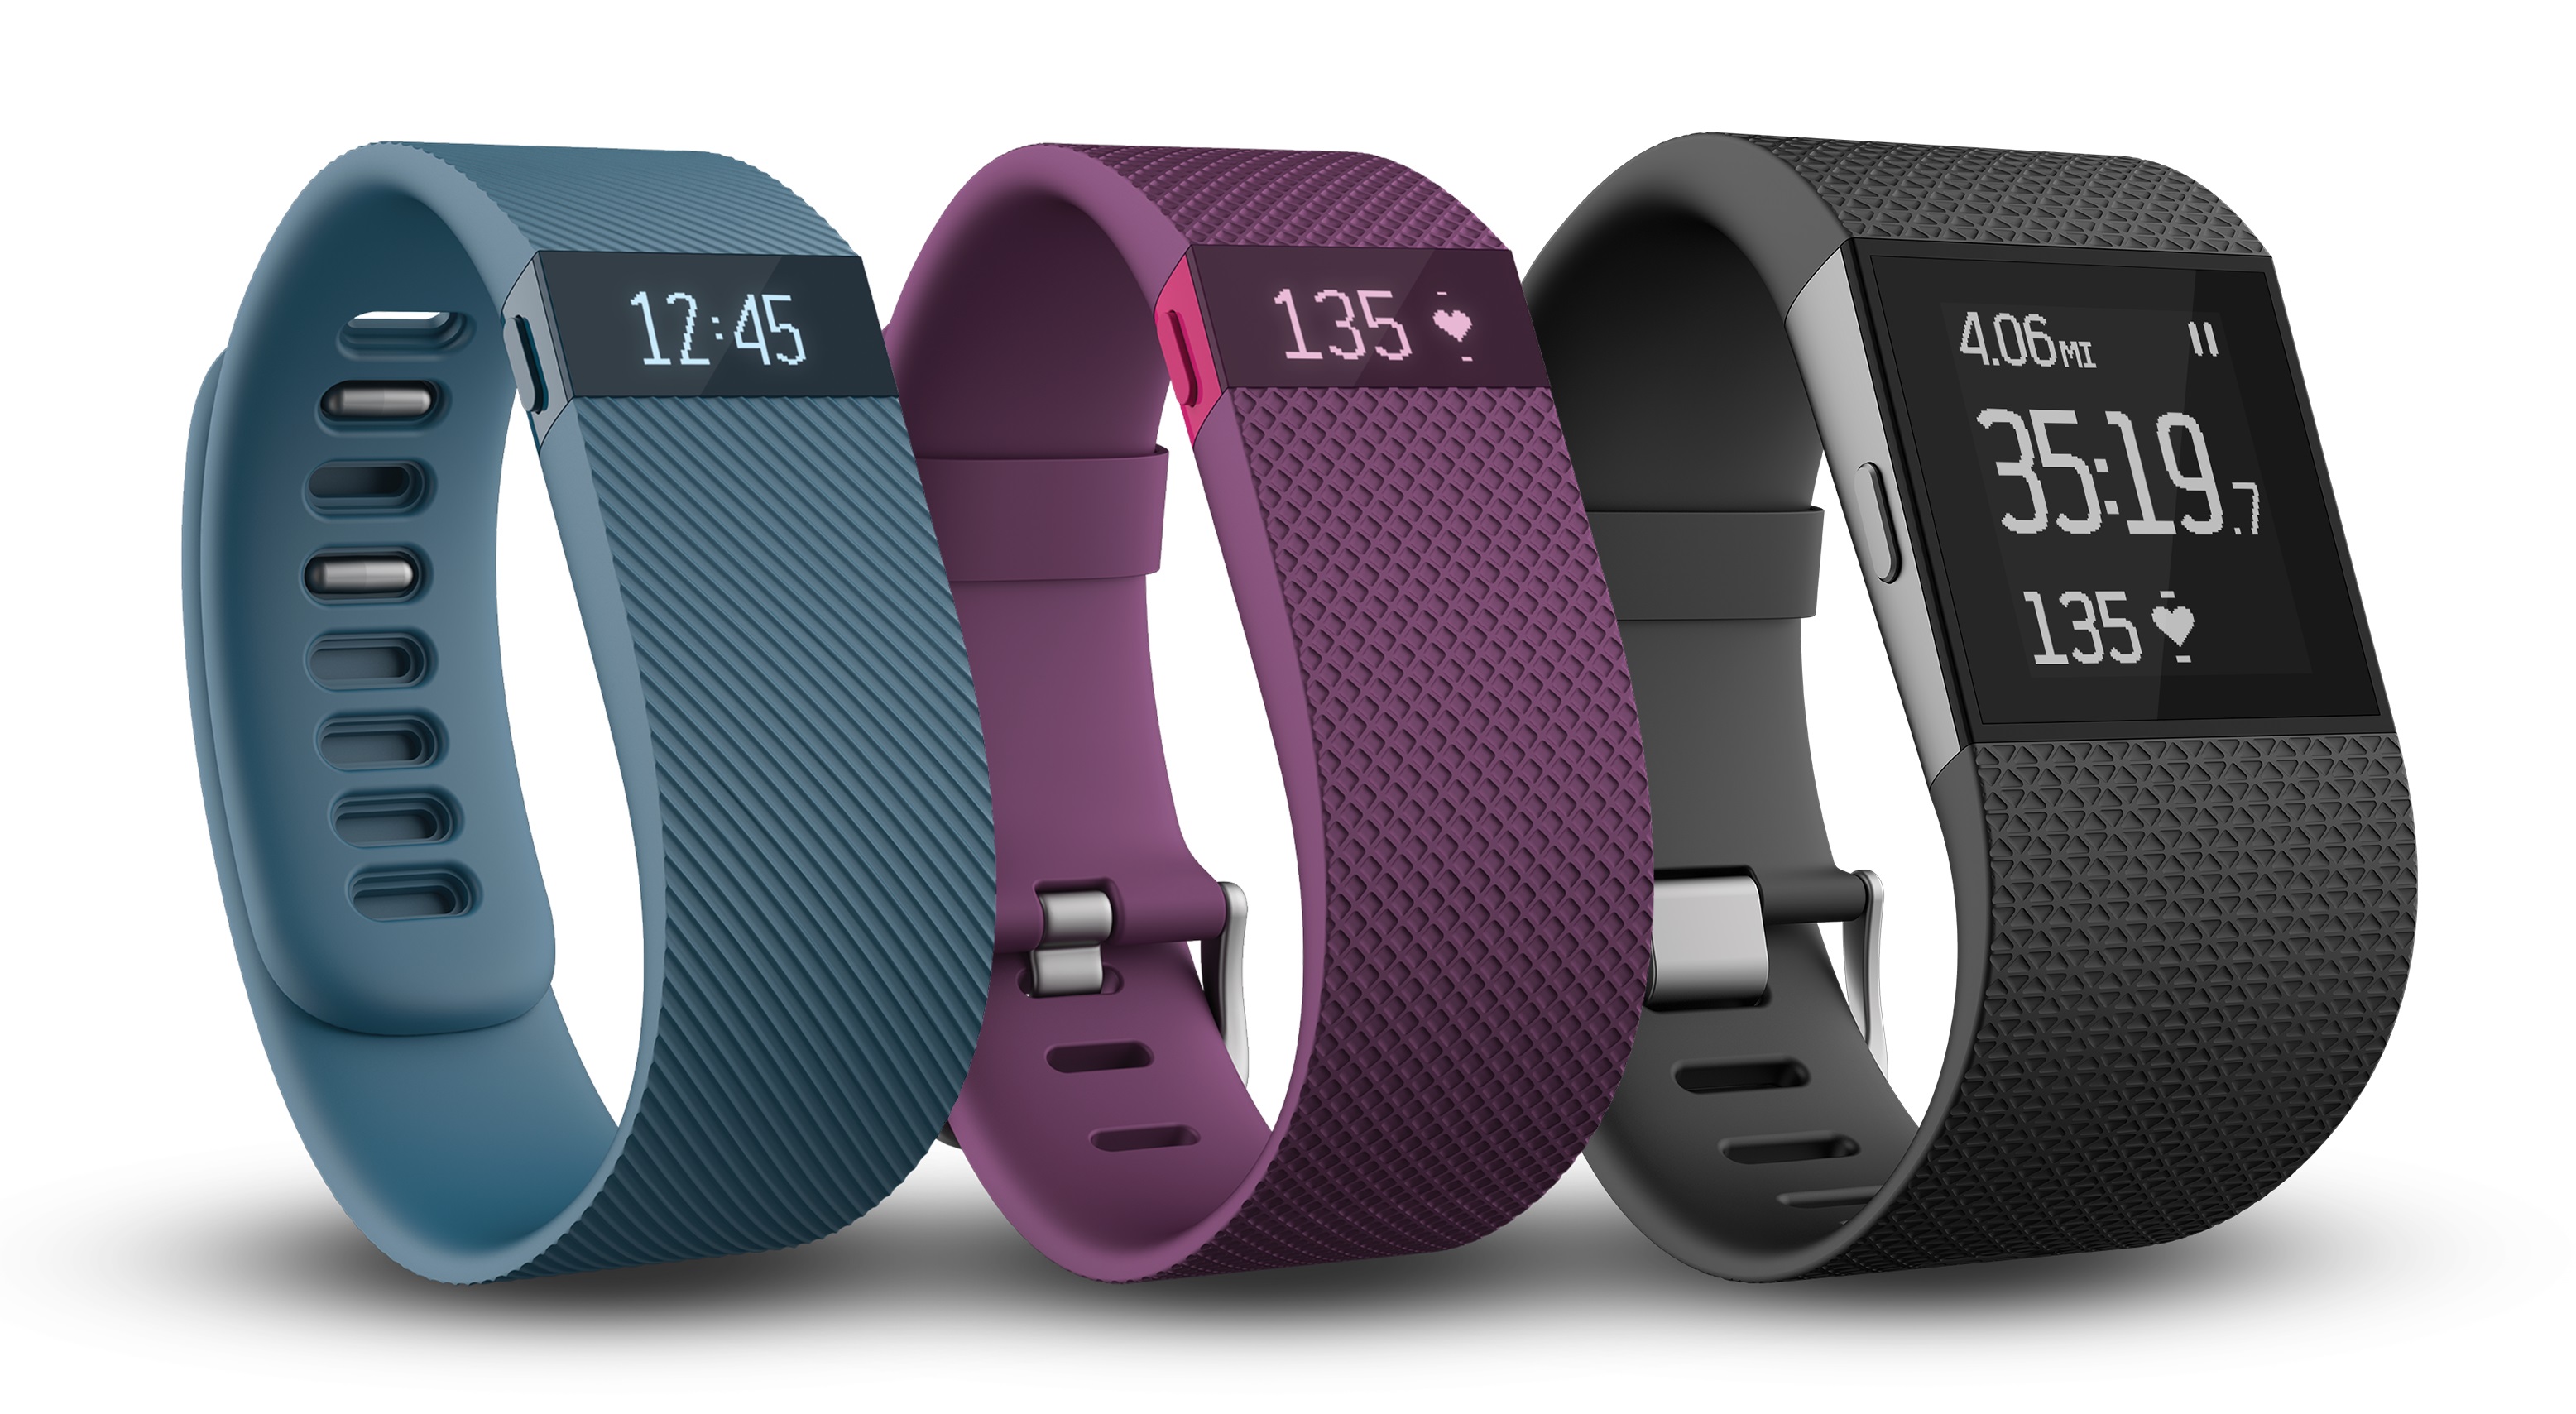 the latest fitbit